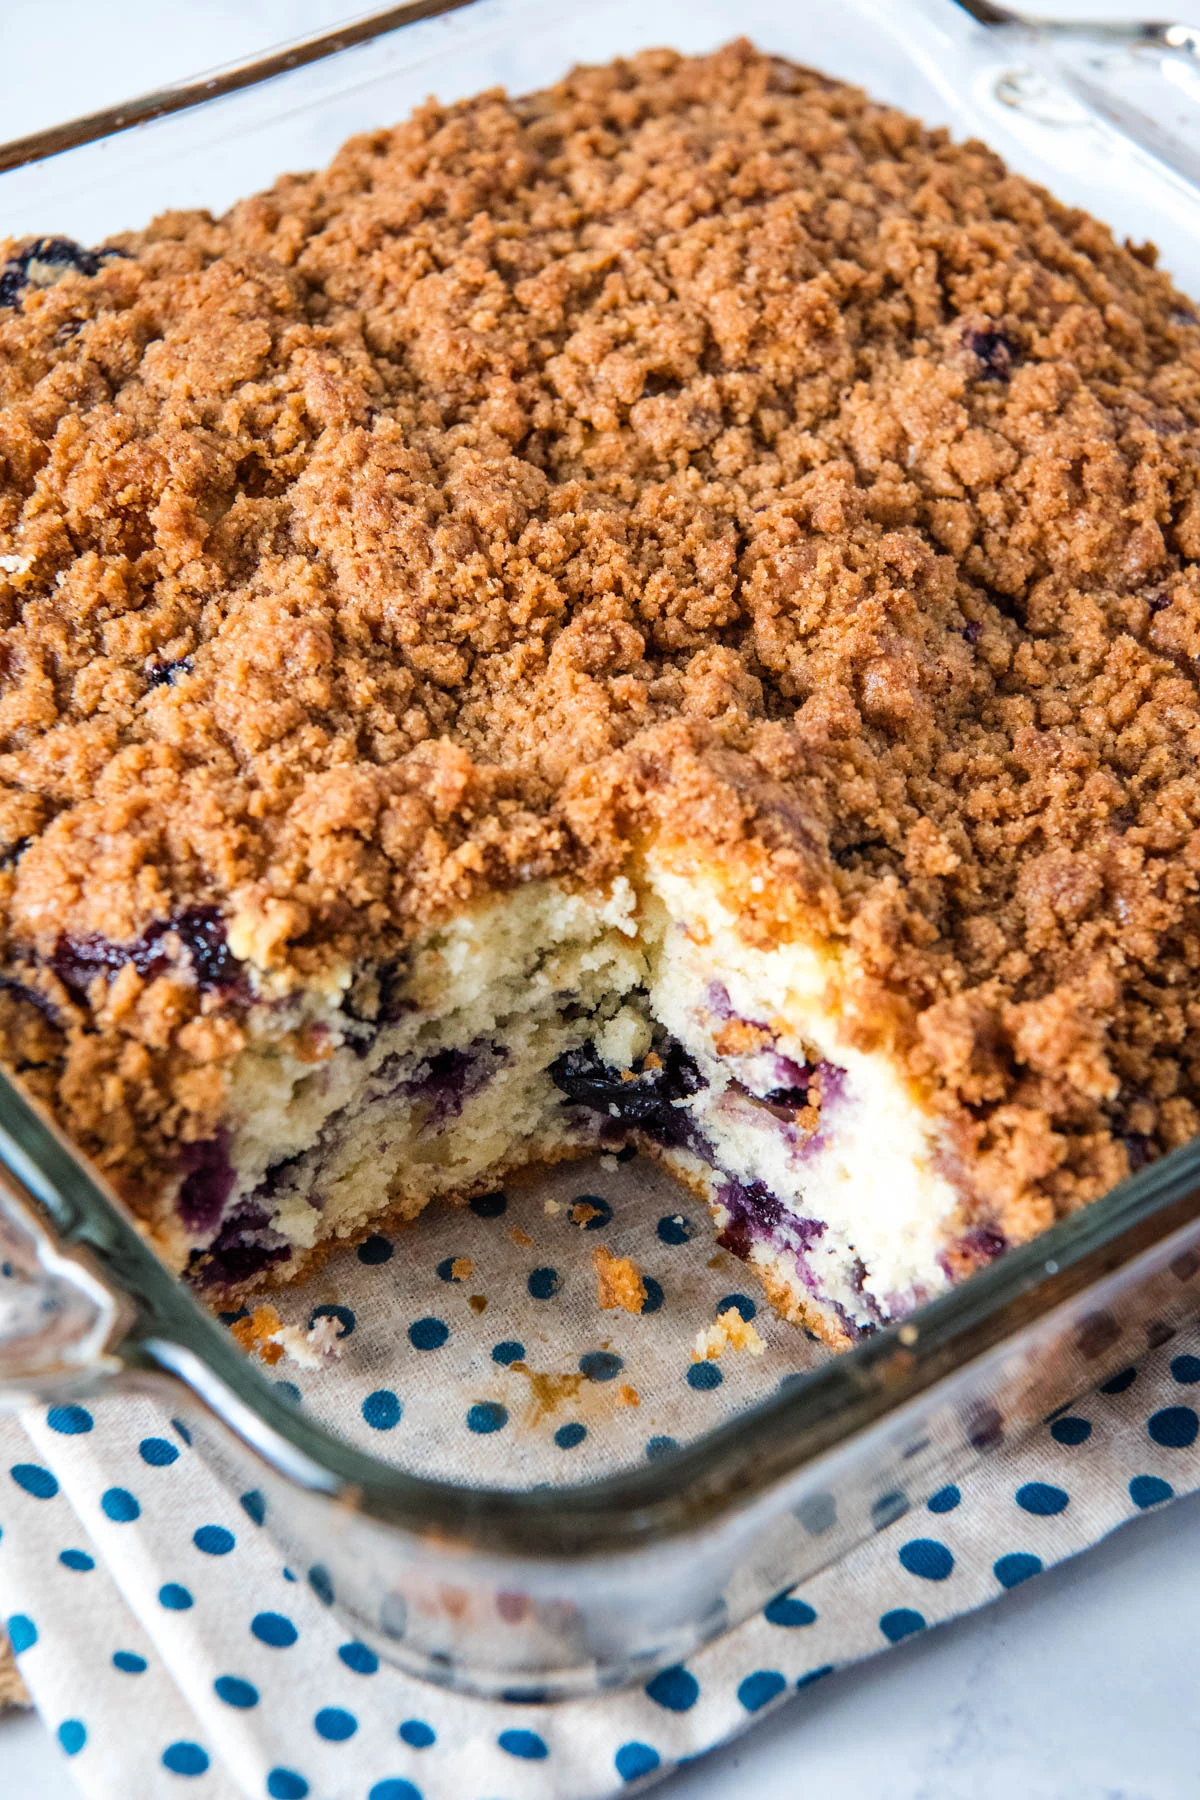 blueberry crumb cake with a sliced square cut out in a large glass baking dish on a white and blue polka dot decorative towel